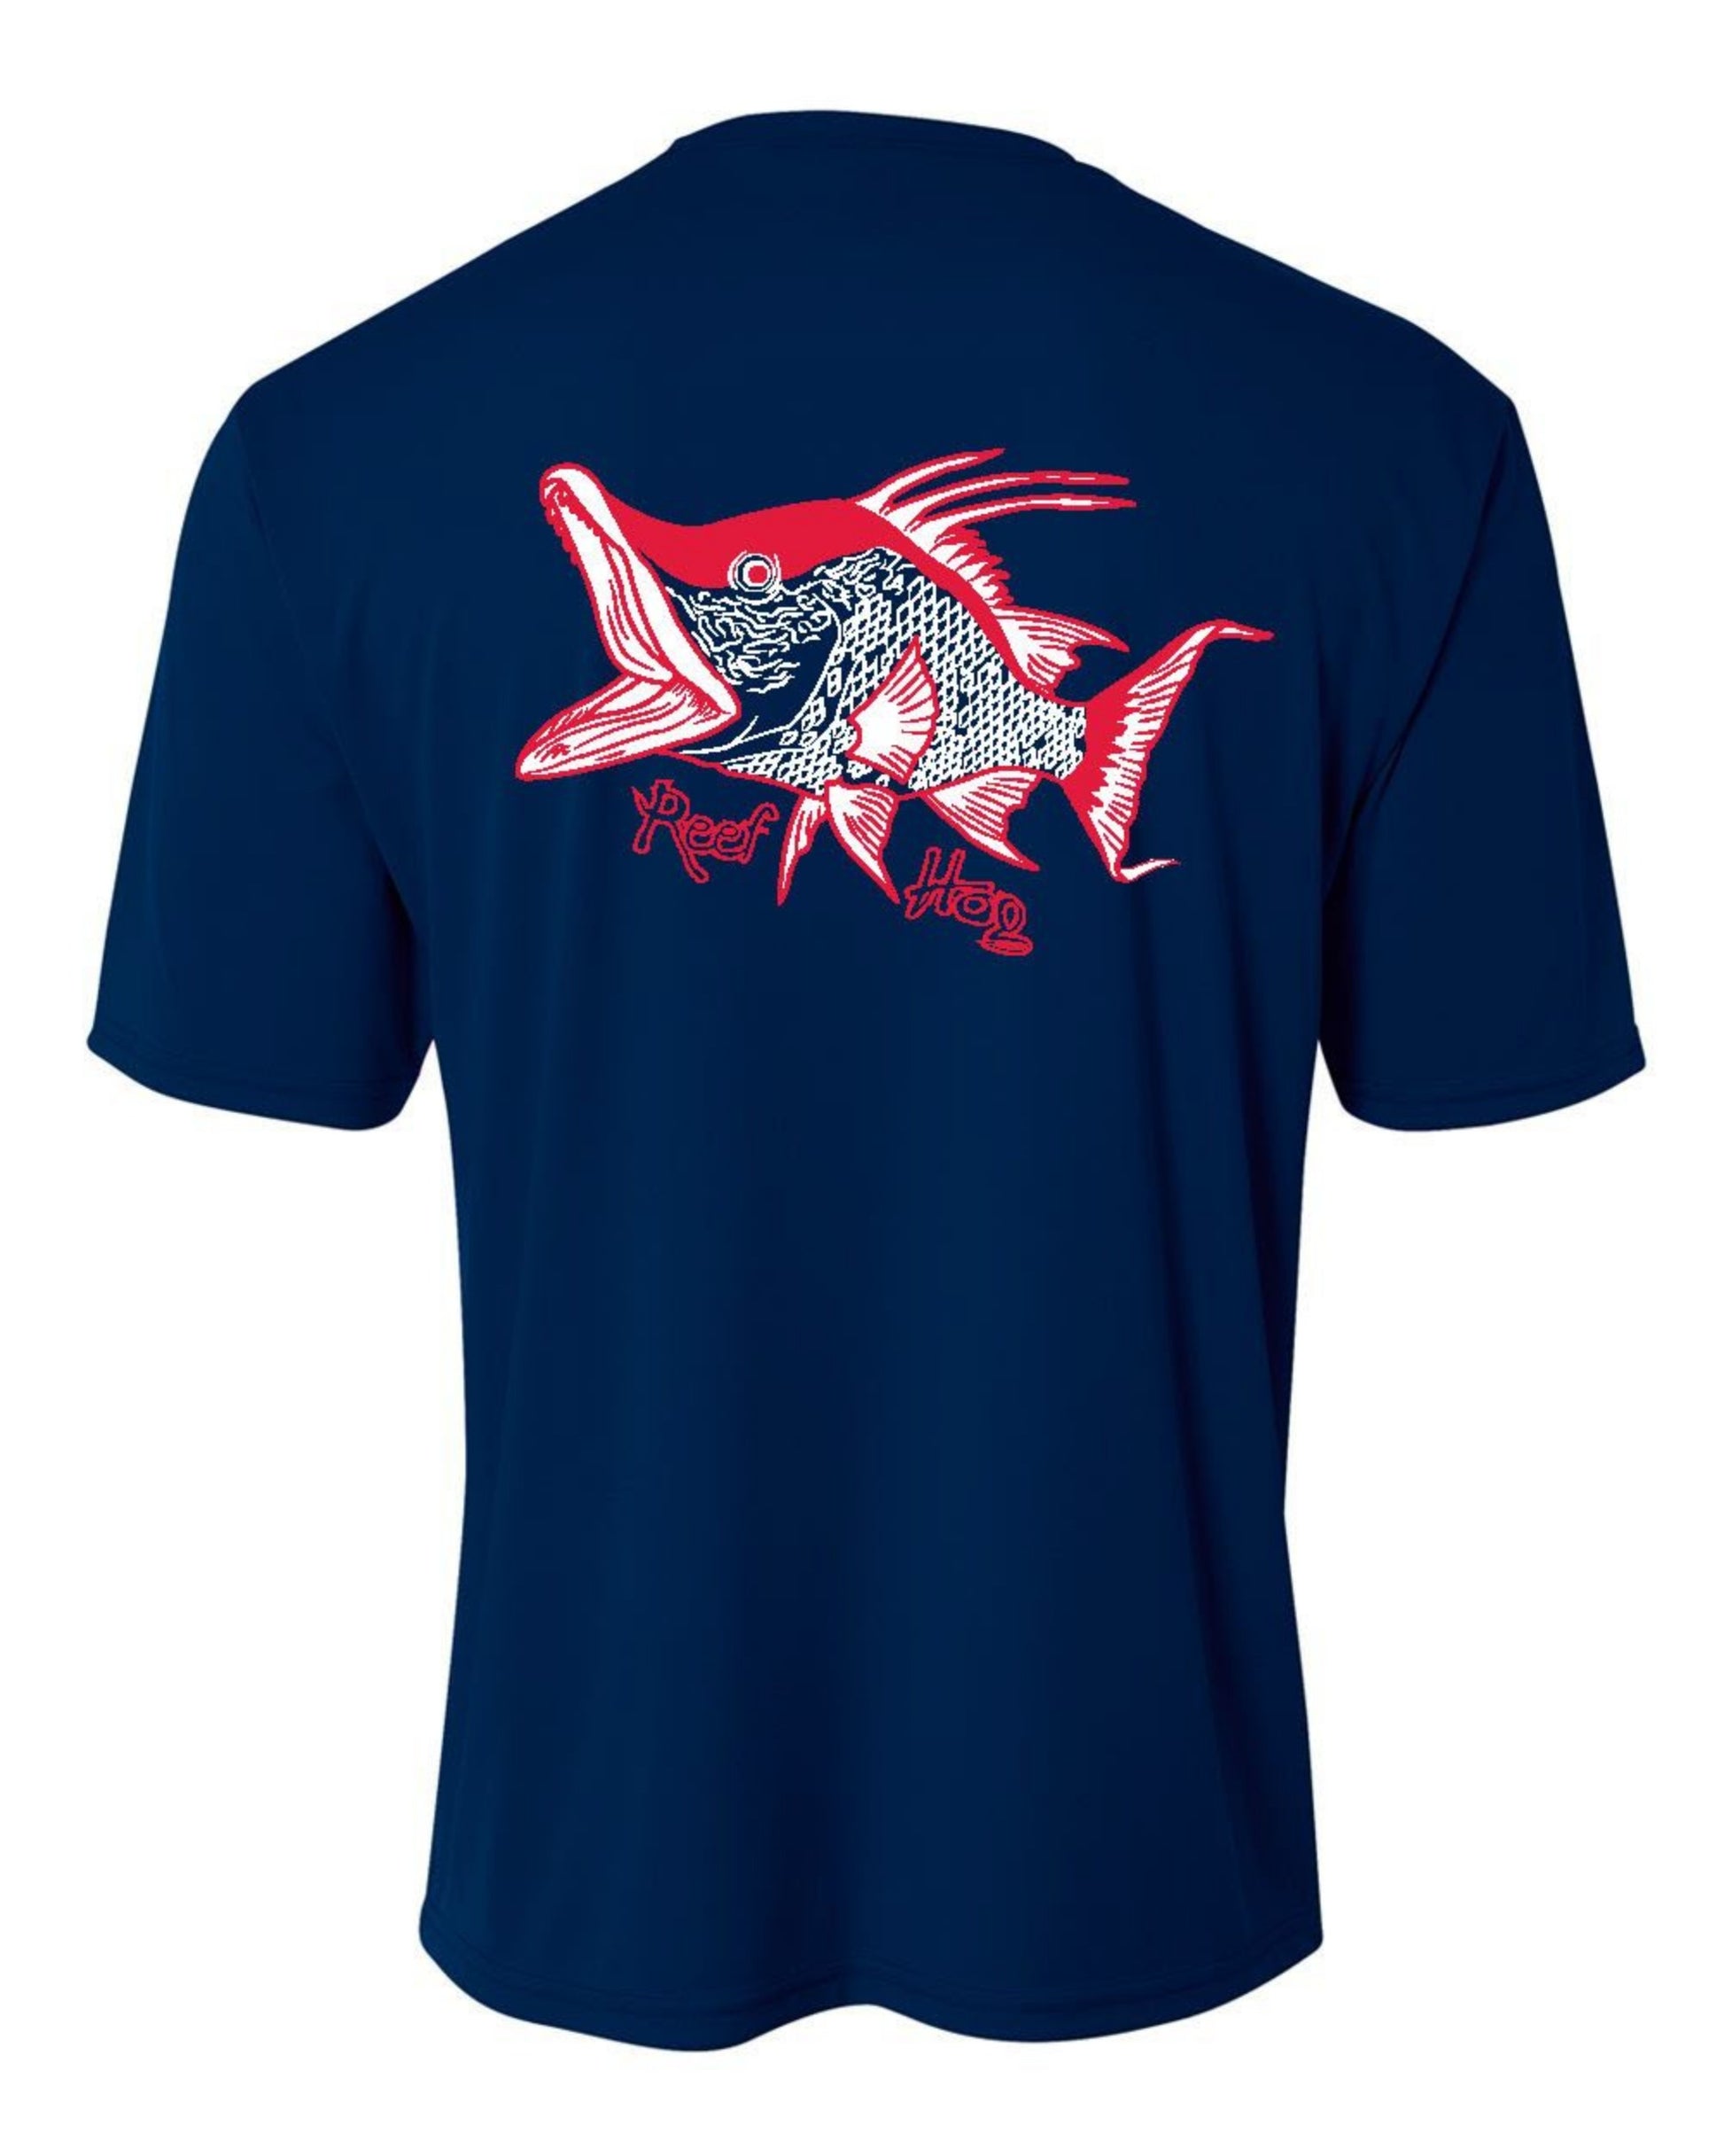 Youth Performance Fishing Shirts 50+uv Sun Protection -Reel Fishy Apparel M / Navy Lobster L/S